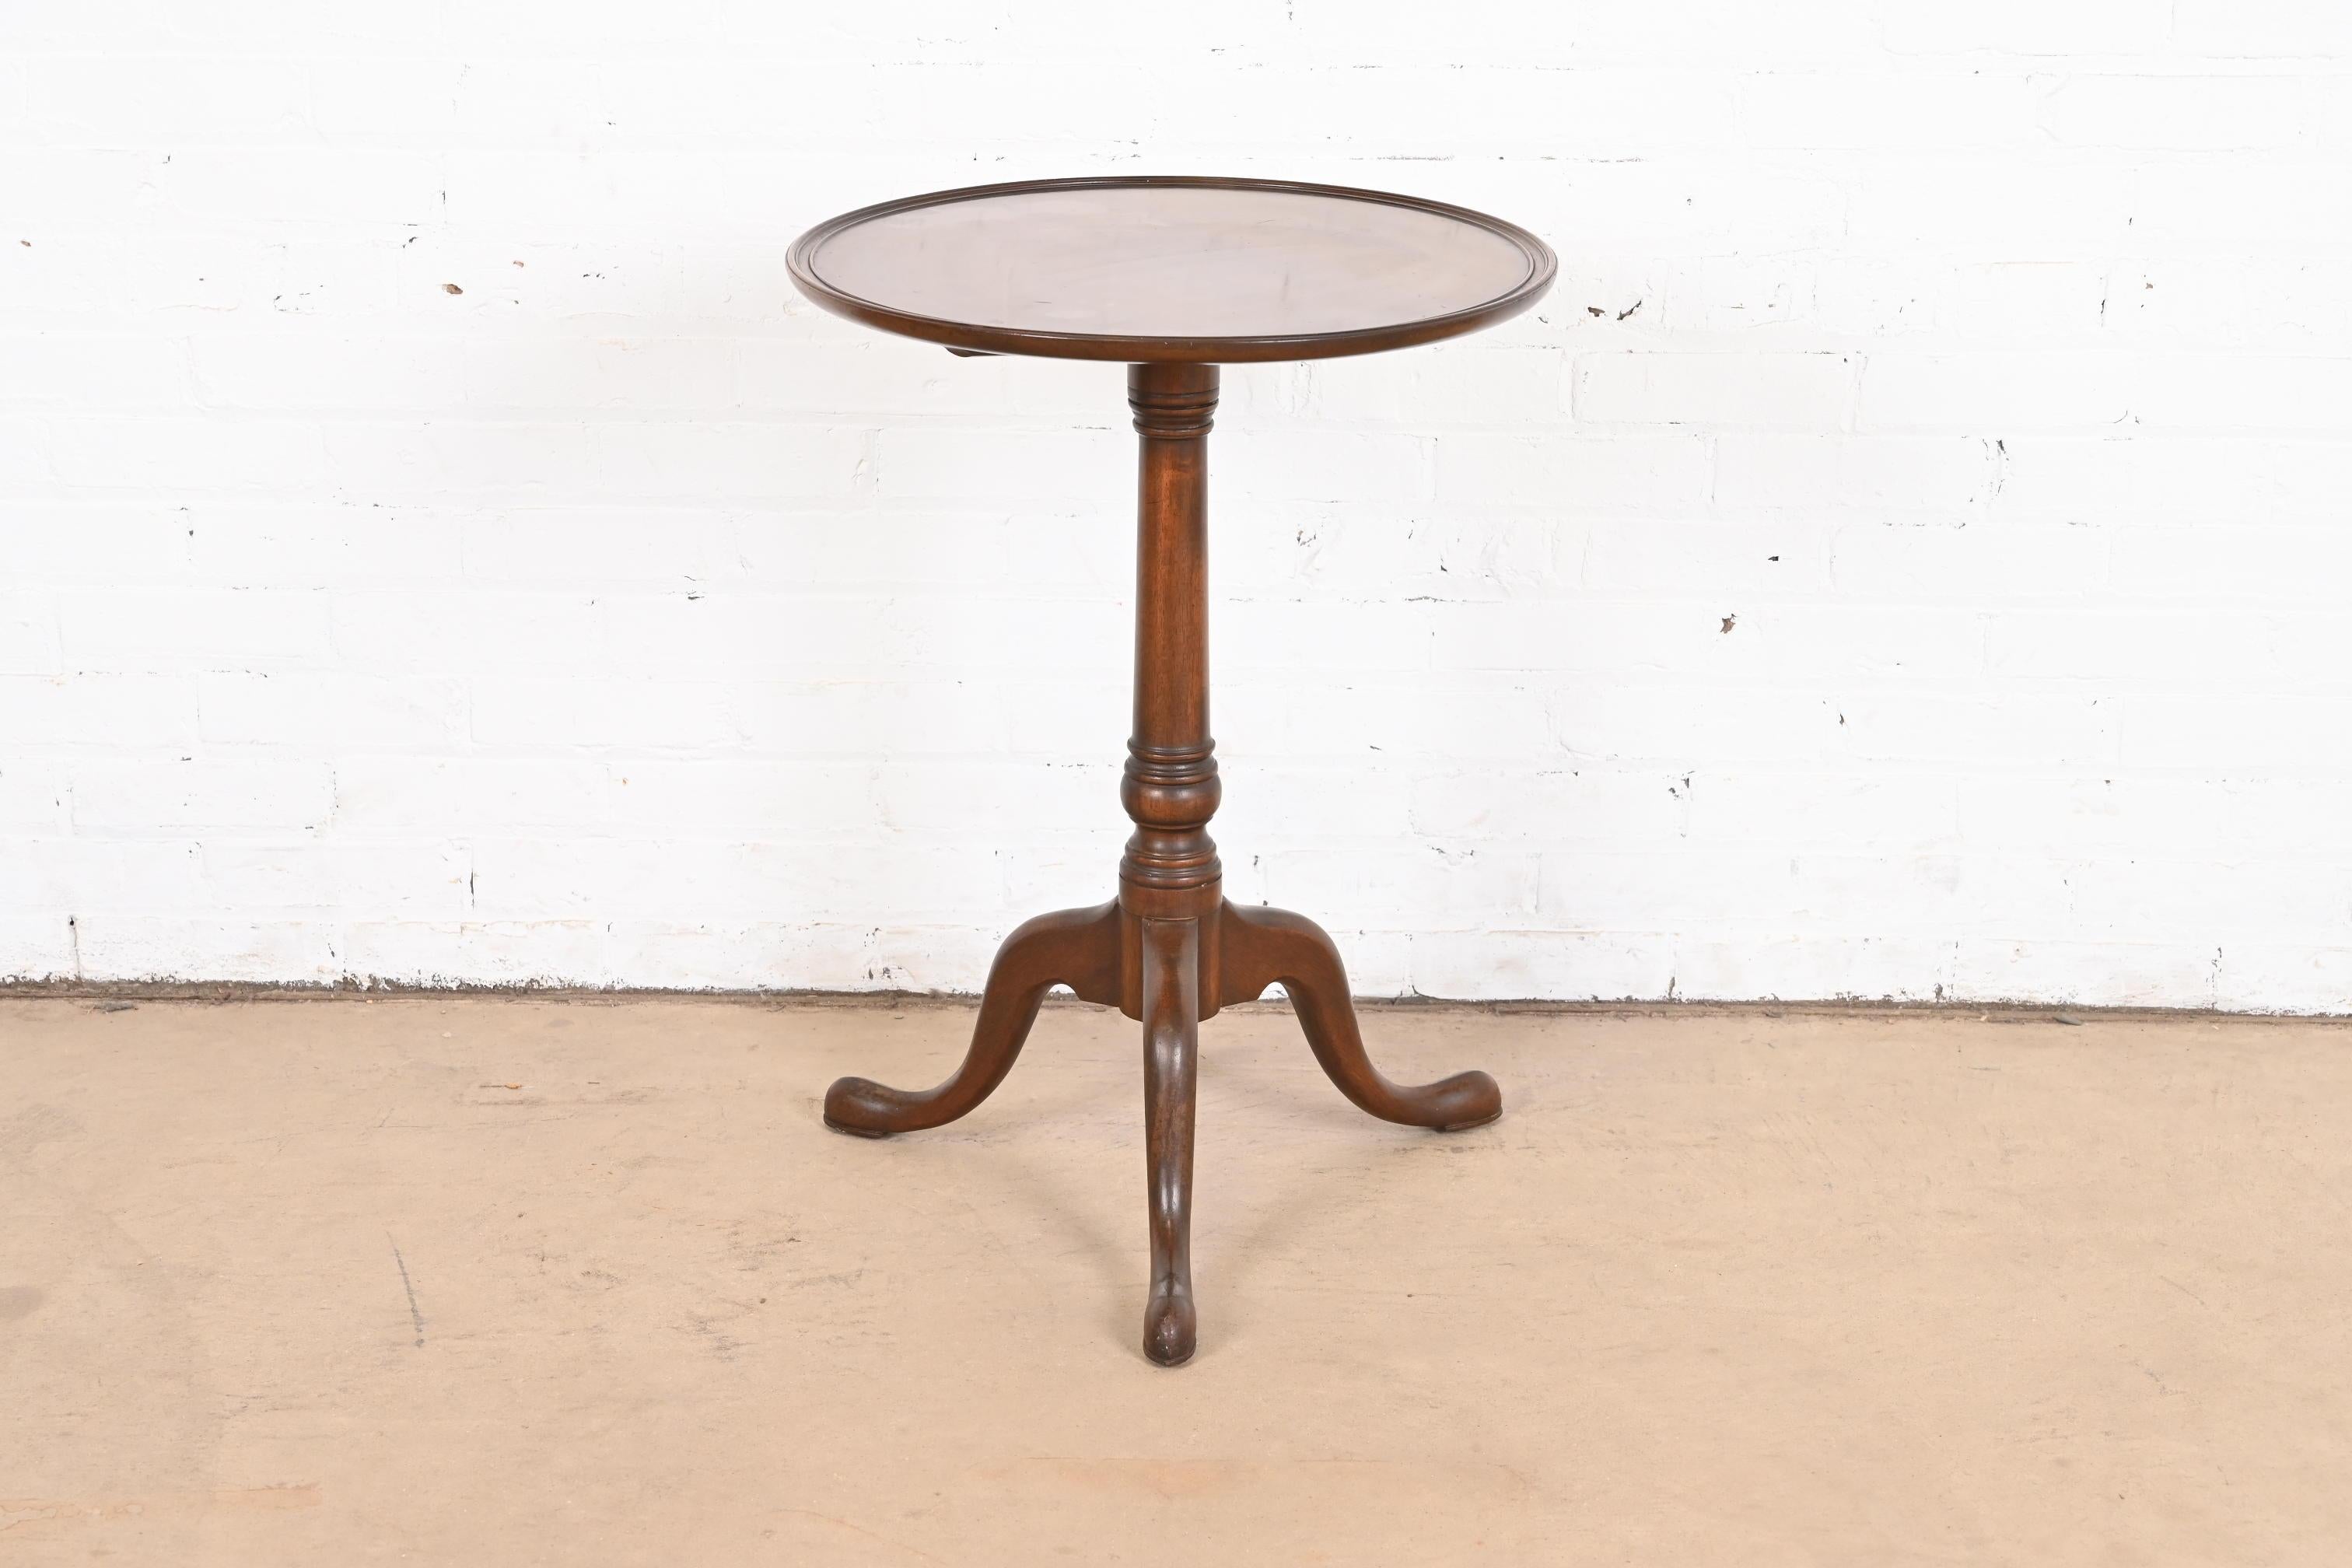 A gorgeous Georgian or Queen Anne style carved mahogany pedestal tea table or occasional side table

By Kittinger, 